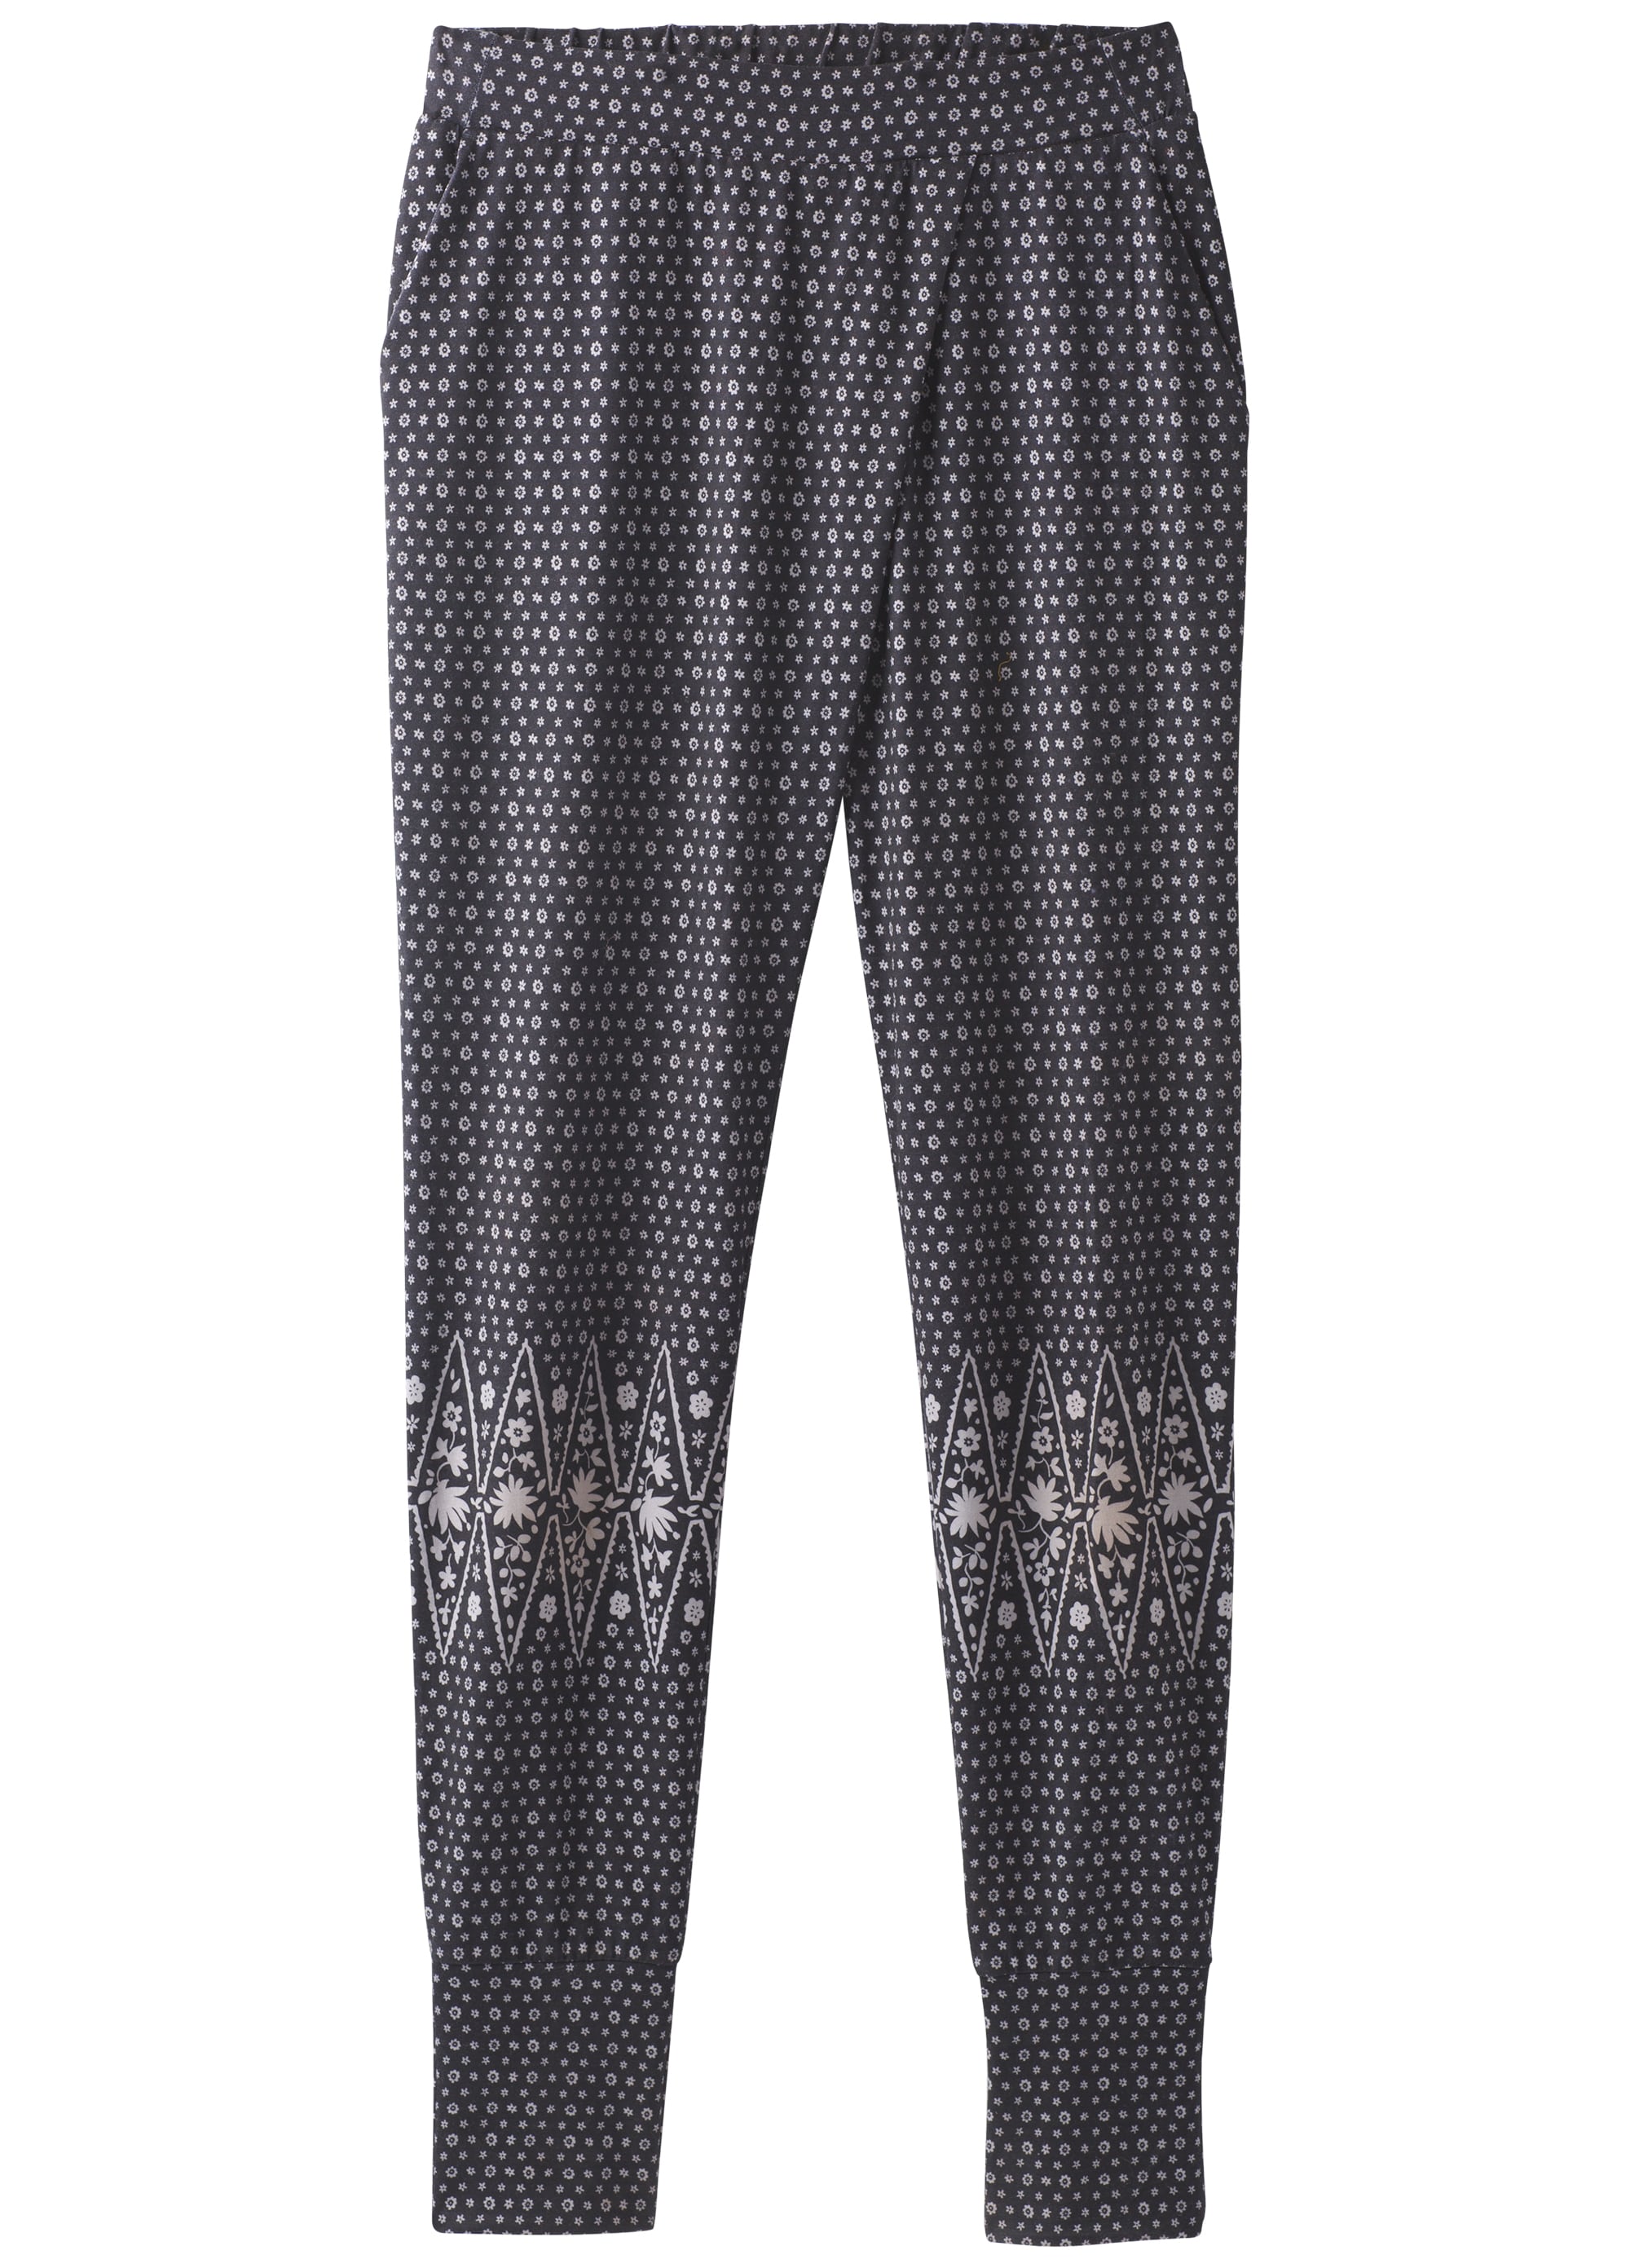 Prana - On The Road - Outdoor trousers - Women's